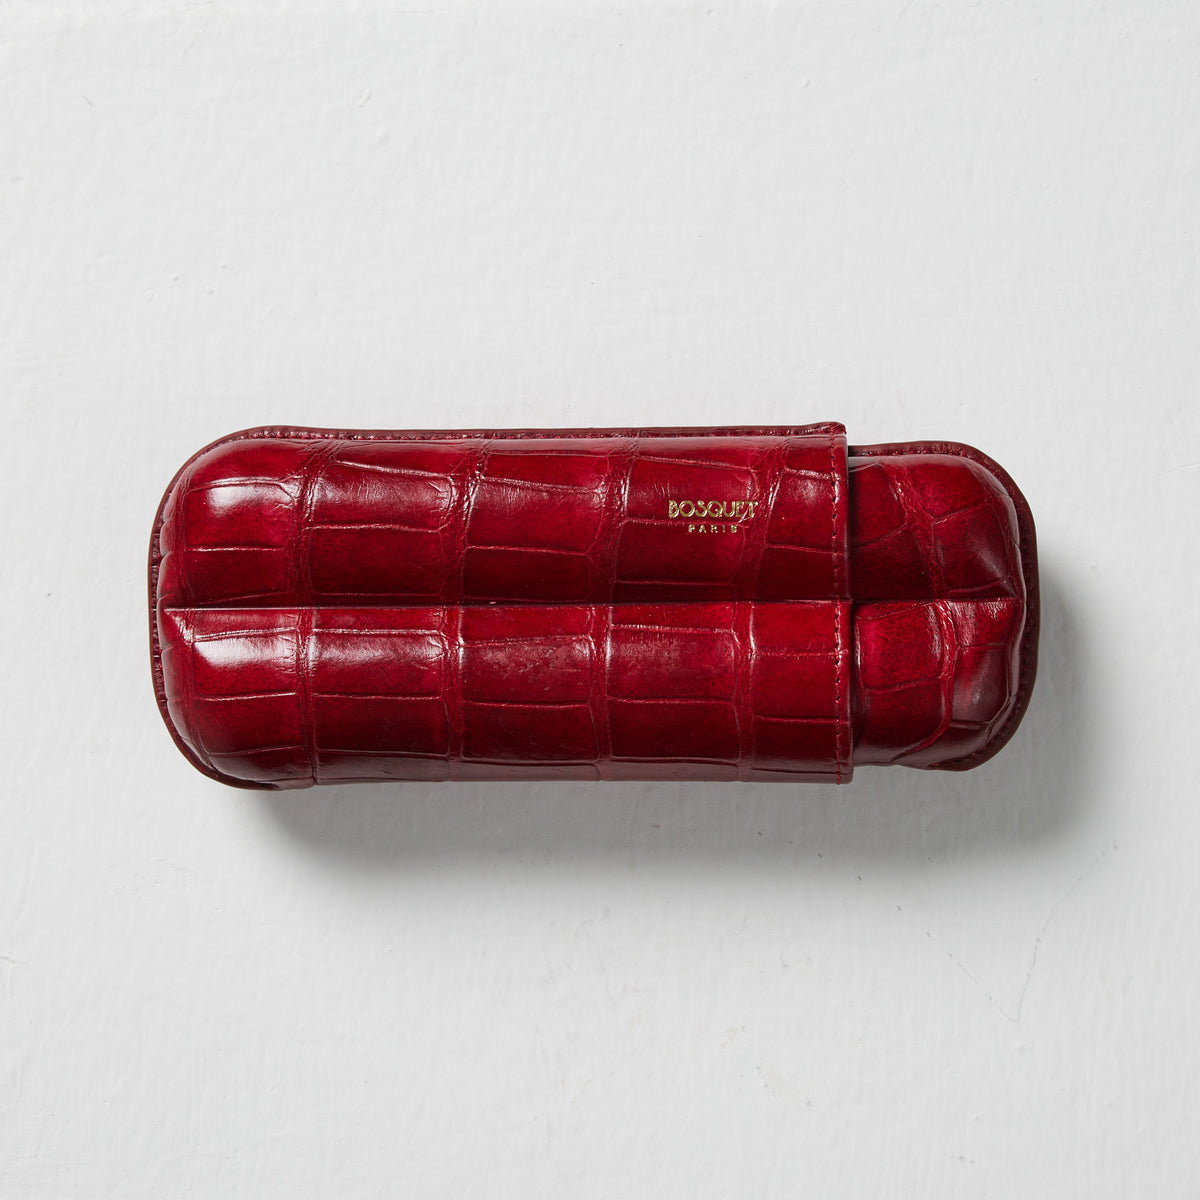 A Bosque Crocodile Cigar Case in Hermes Red on a white surface.